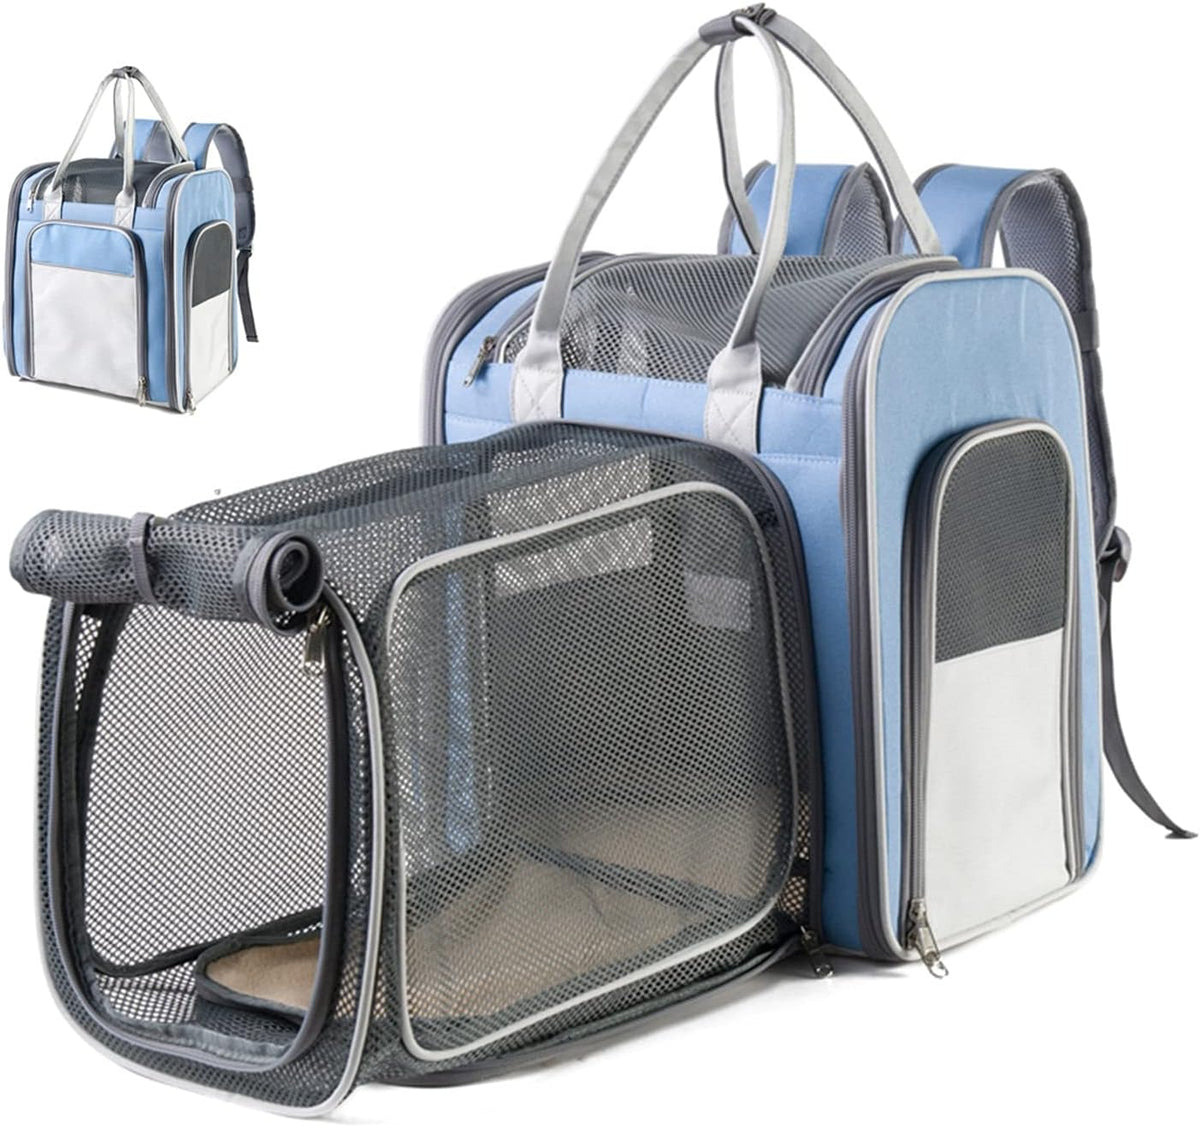 Cat Backpack Carrier Expandable